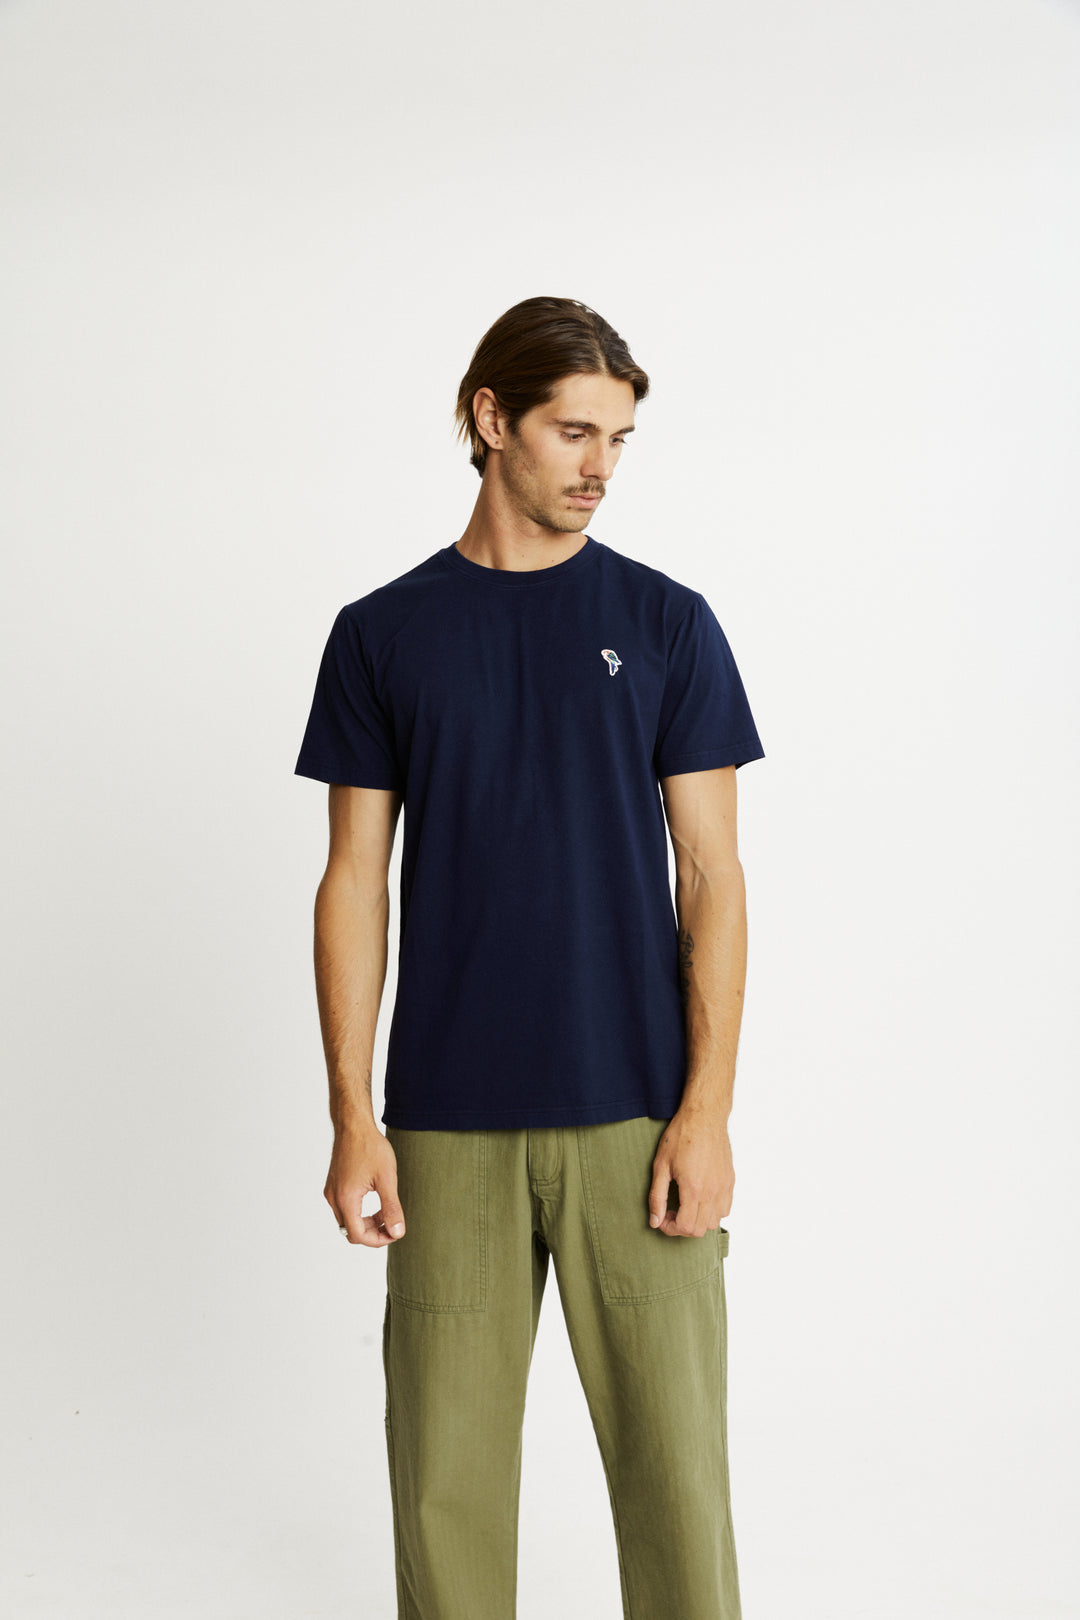 Mr Simple - Chapman Rosella Tee in Navy | Buster McGee Daylesford